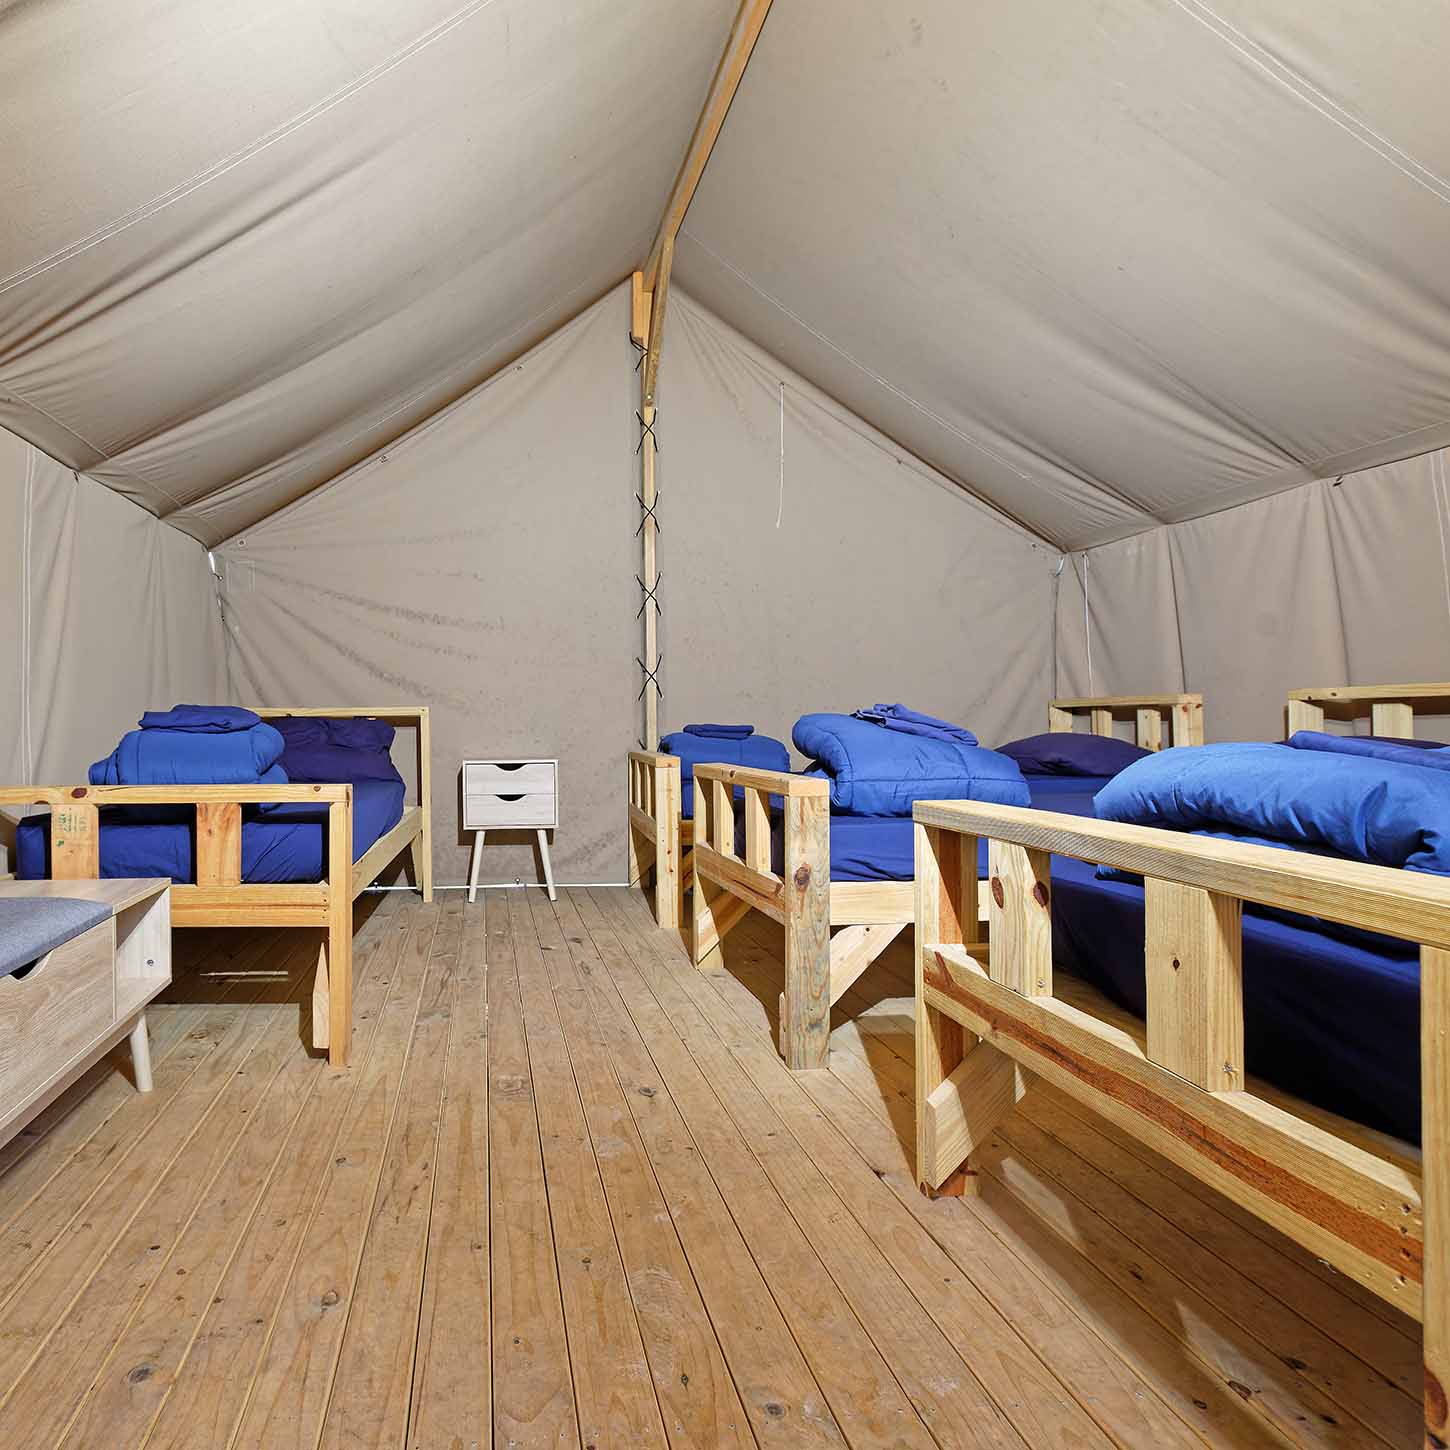 Interior of a large tent with multiple wooden bunk beds covered in blue bedding, a small white bedside table on a wooden floor.